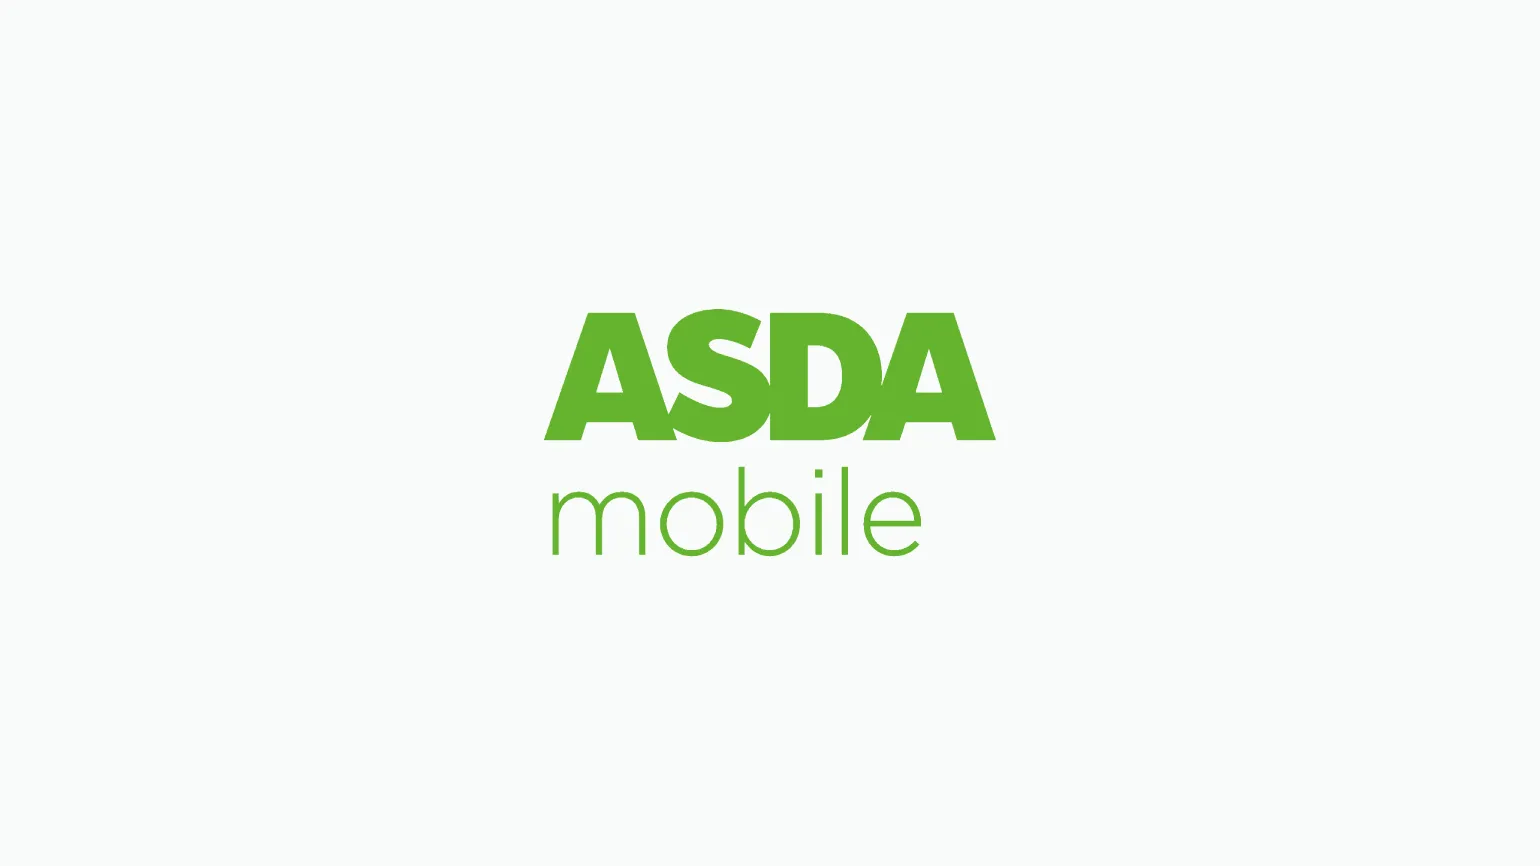 Asda Mobile reduces EU roaming limit from 25GB to 5GB, also hikes pay as you go rates